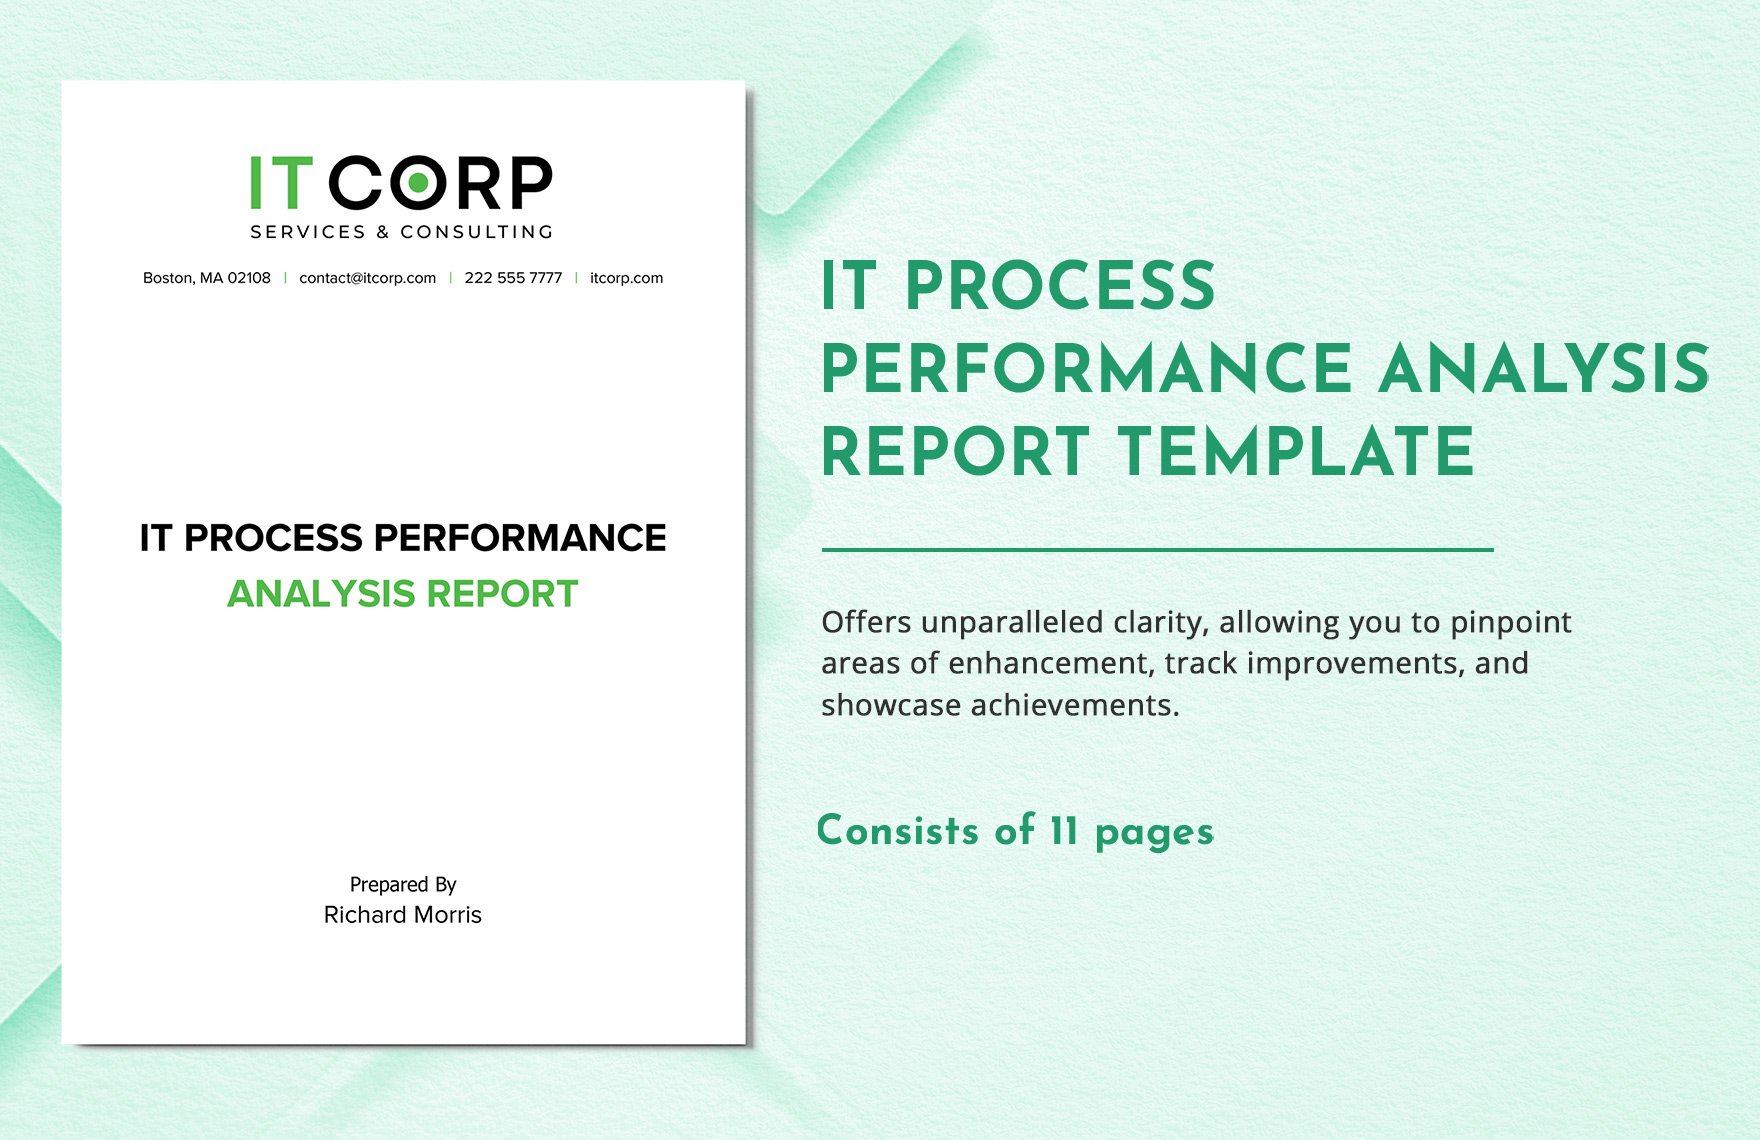 IT Process Performance Analysis Report Template